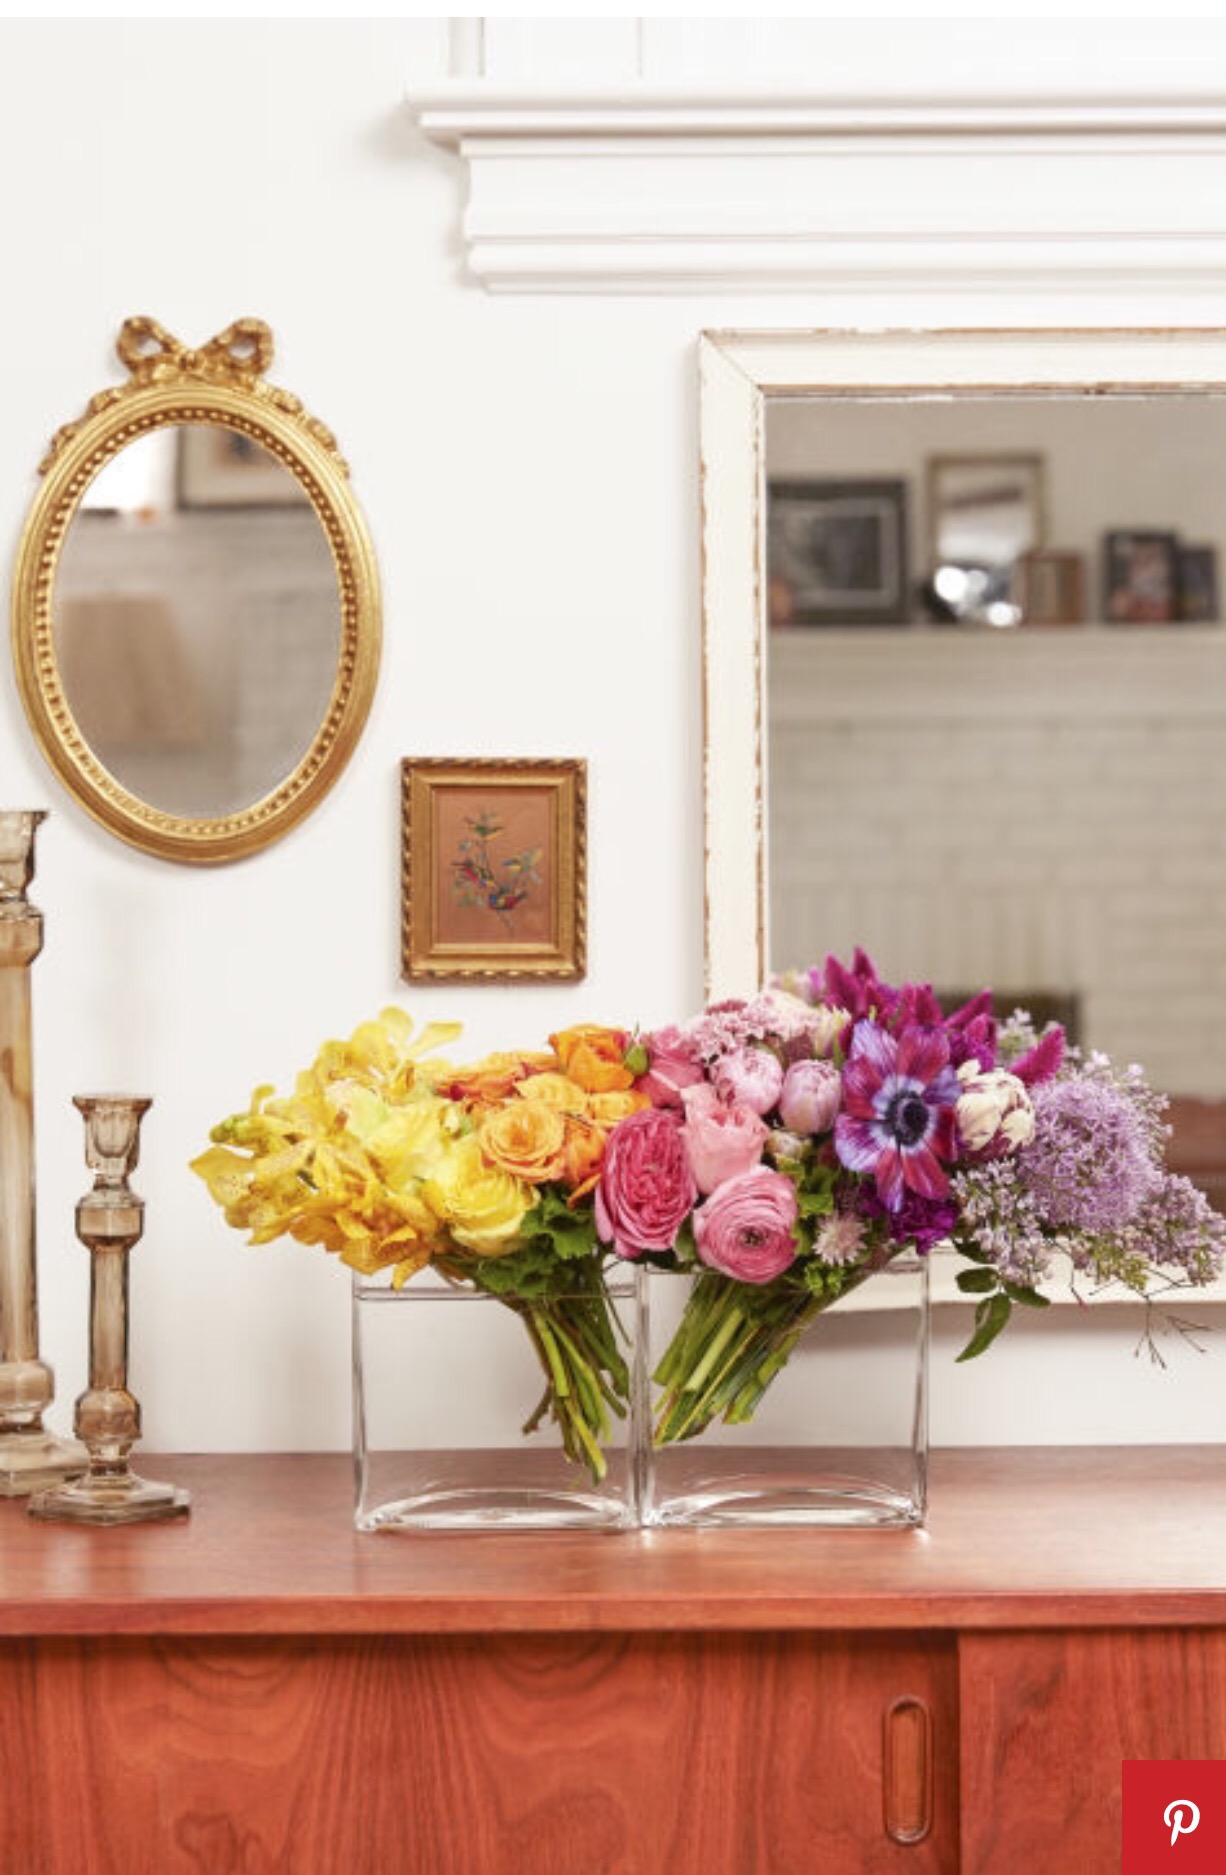 What are some tips for making your own flower arrangements?